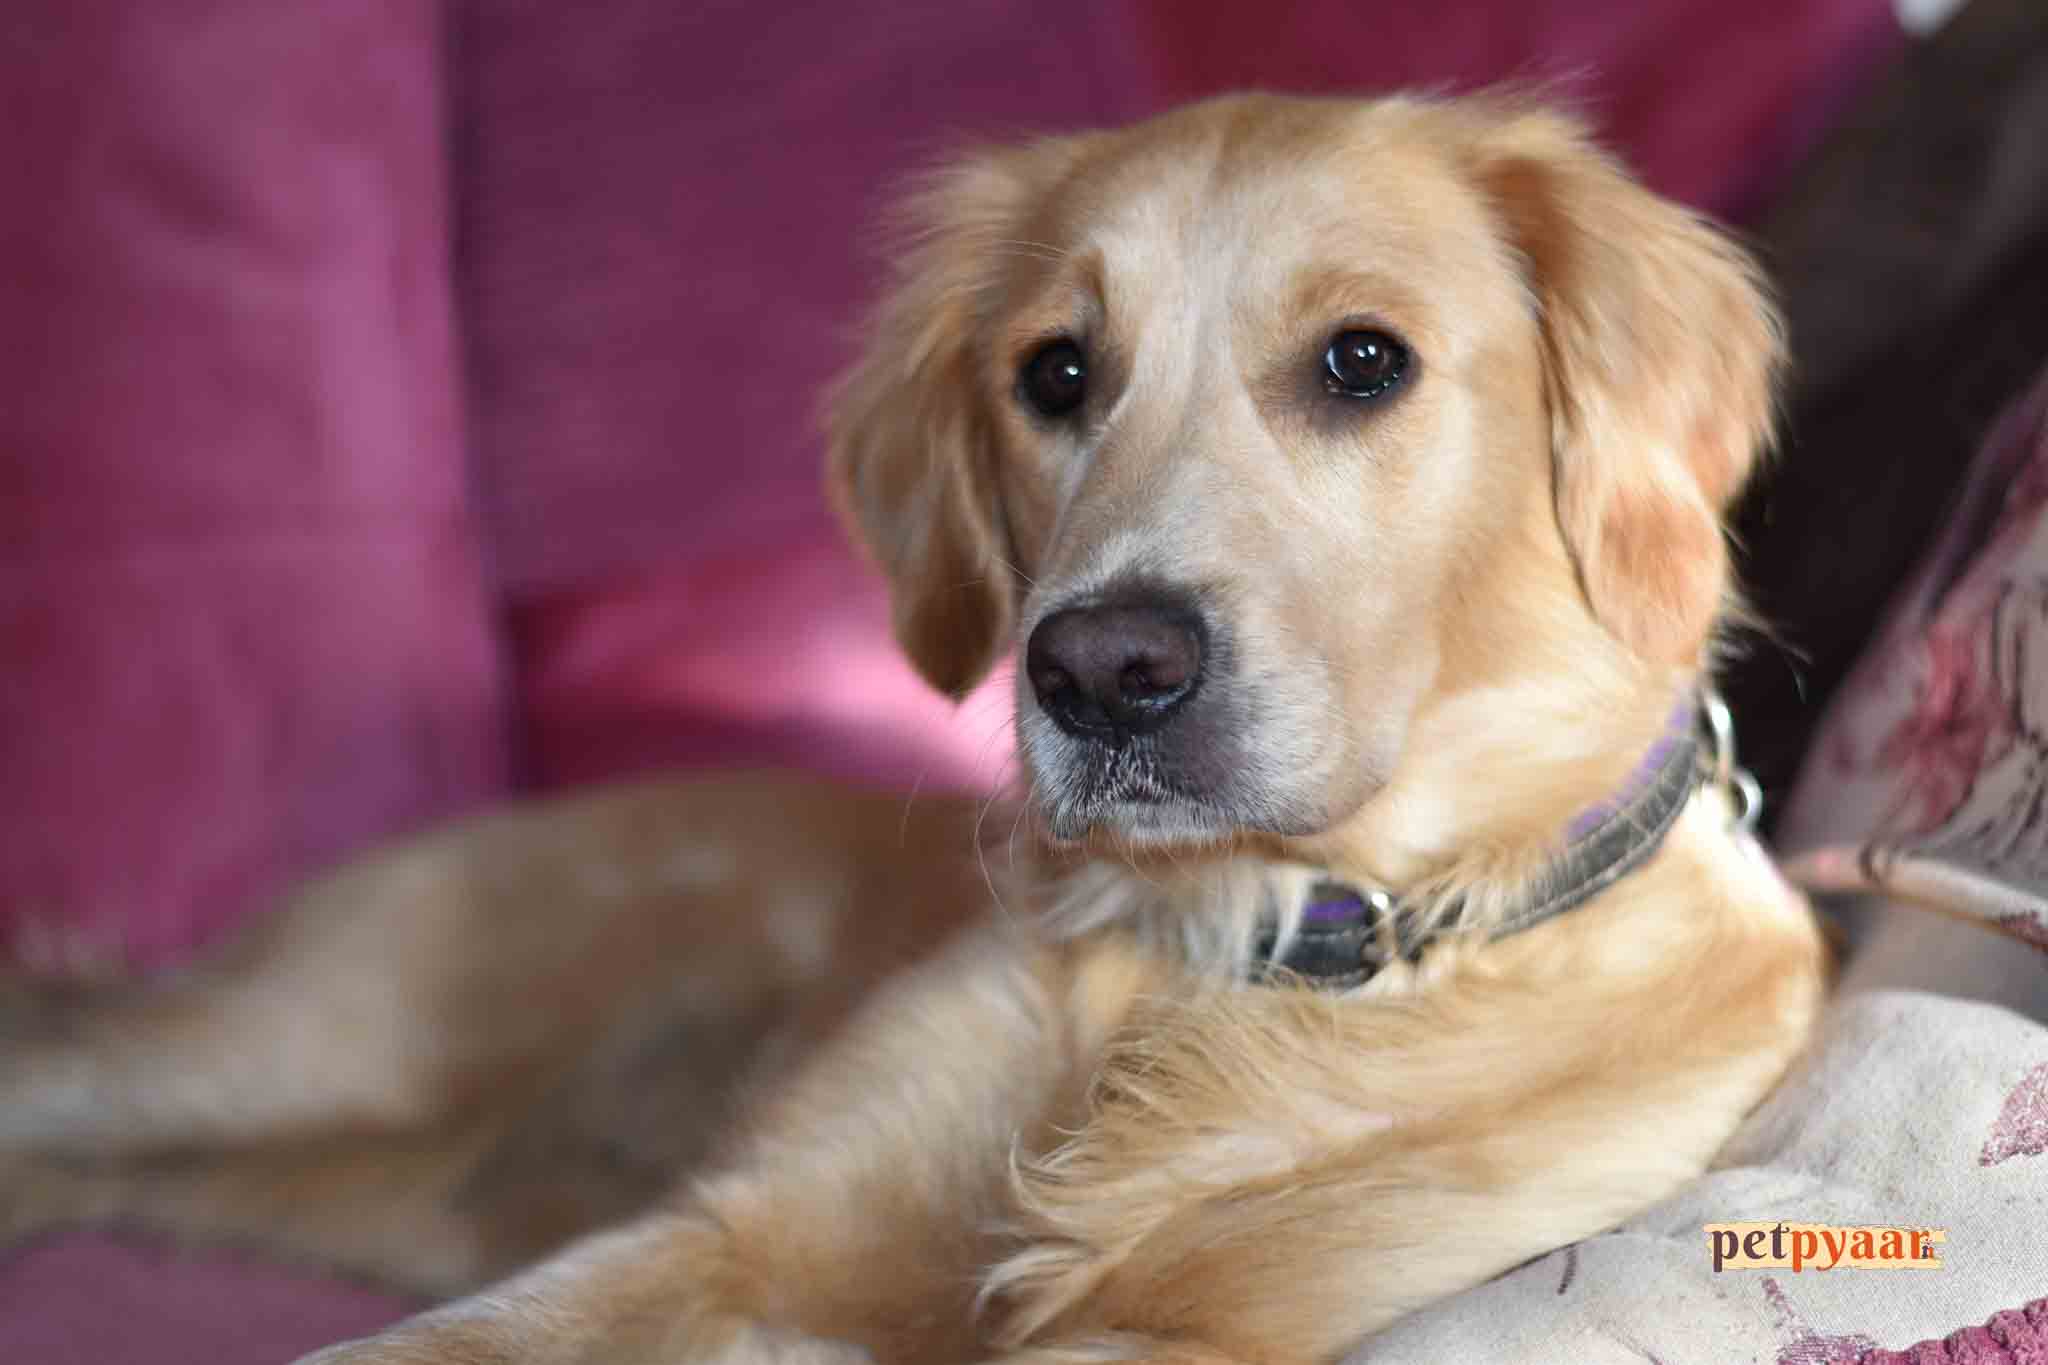 "Golden Retriever Separation Anxiety Solutions in India: How to Deal with Dog Separation Anxiety"